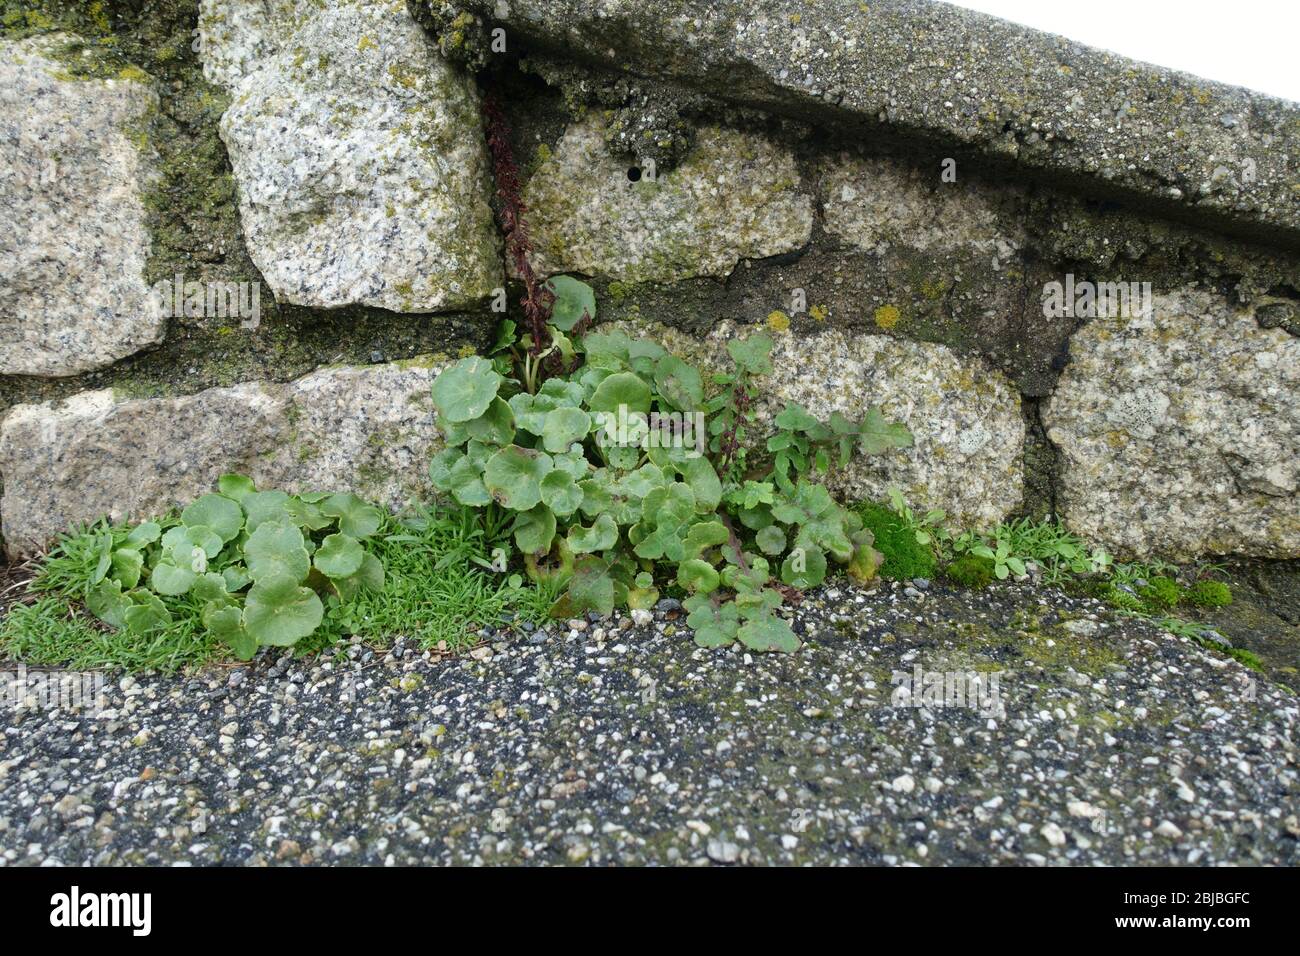 Pennywort or navelwort Umbilicus rupestris growing in stone wall, Falmouth, UK Stock Photo